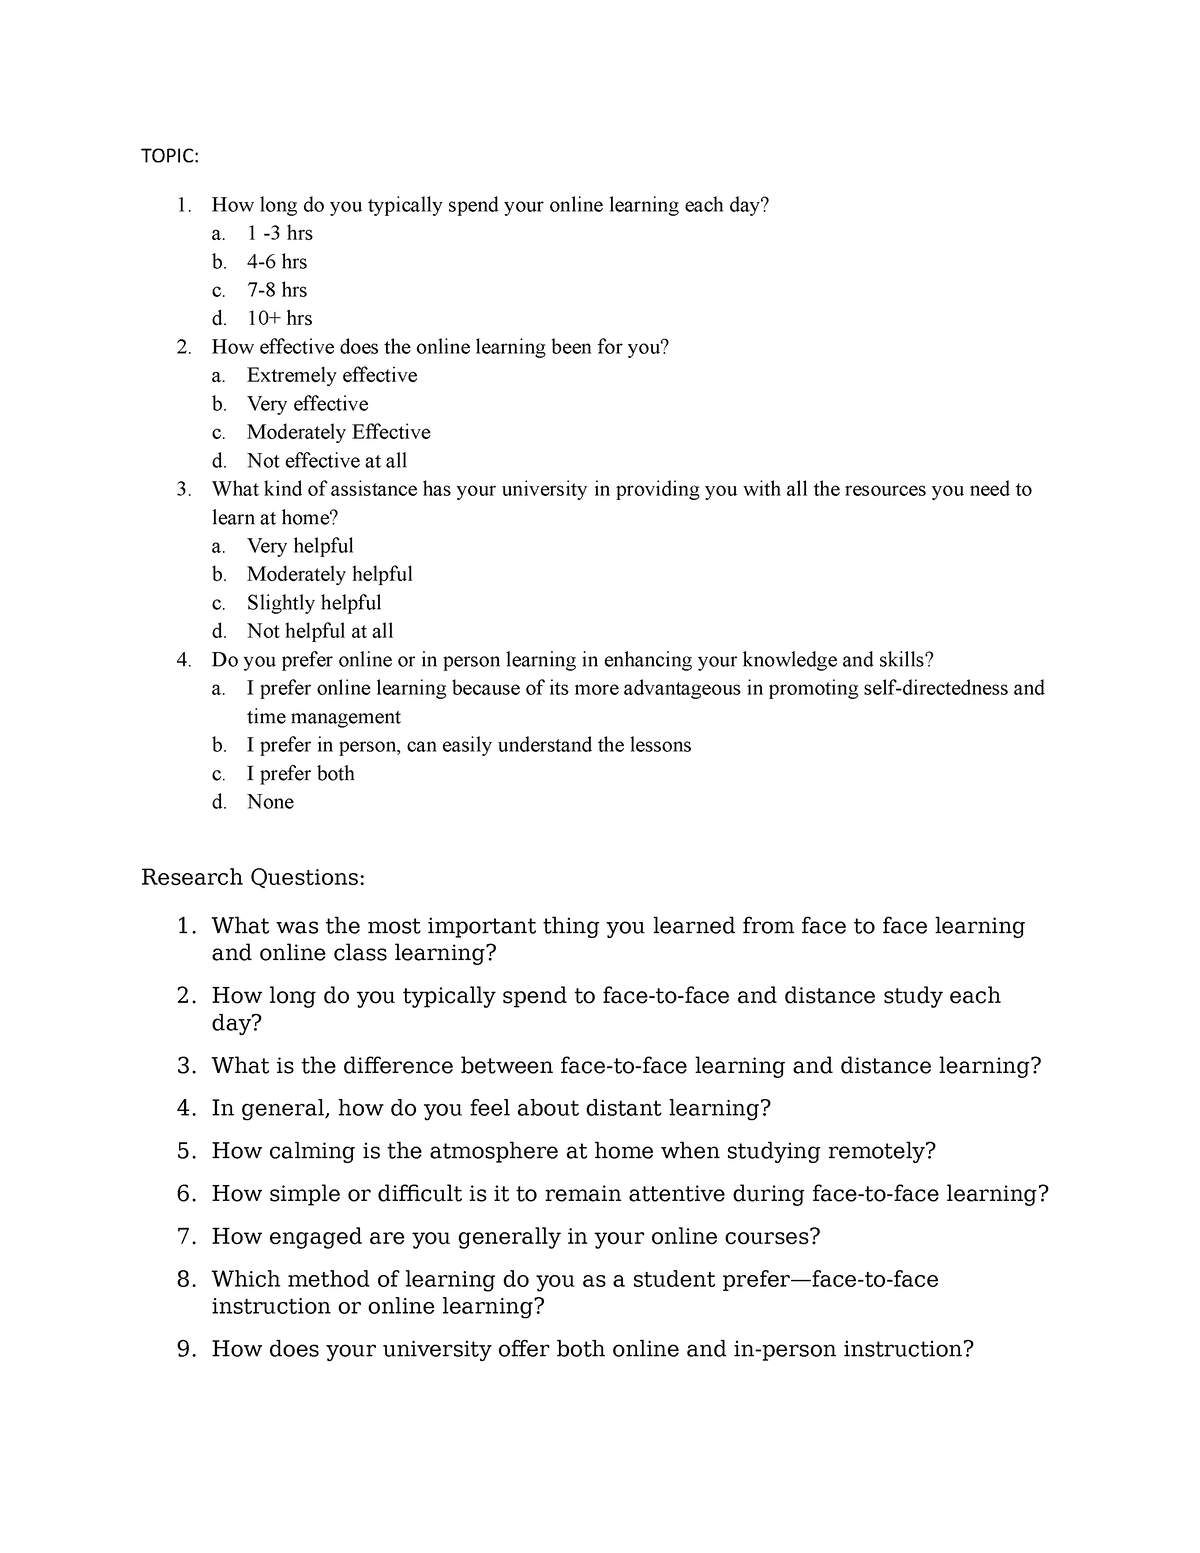 List of sample questions - TOPIC: How long do you typically spend your ...